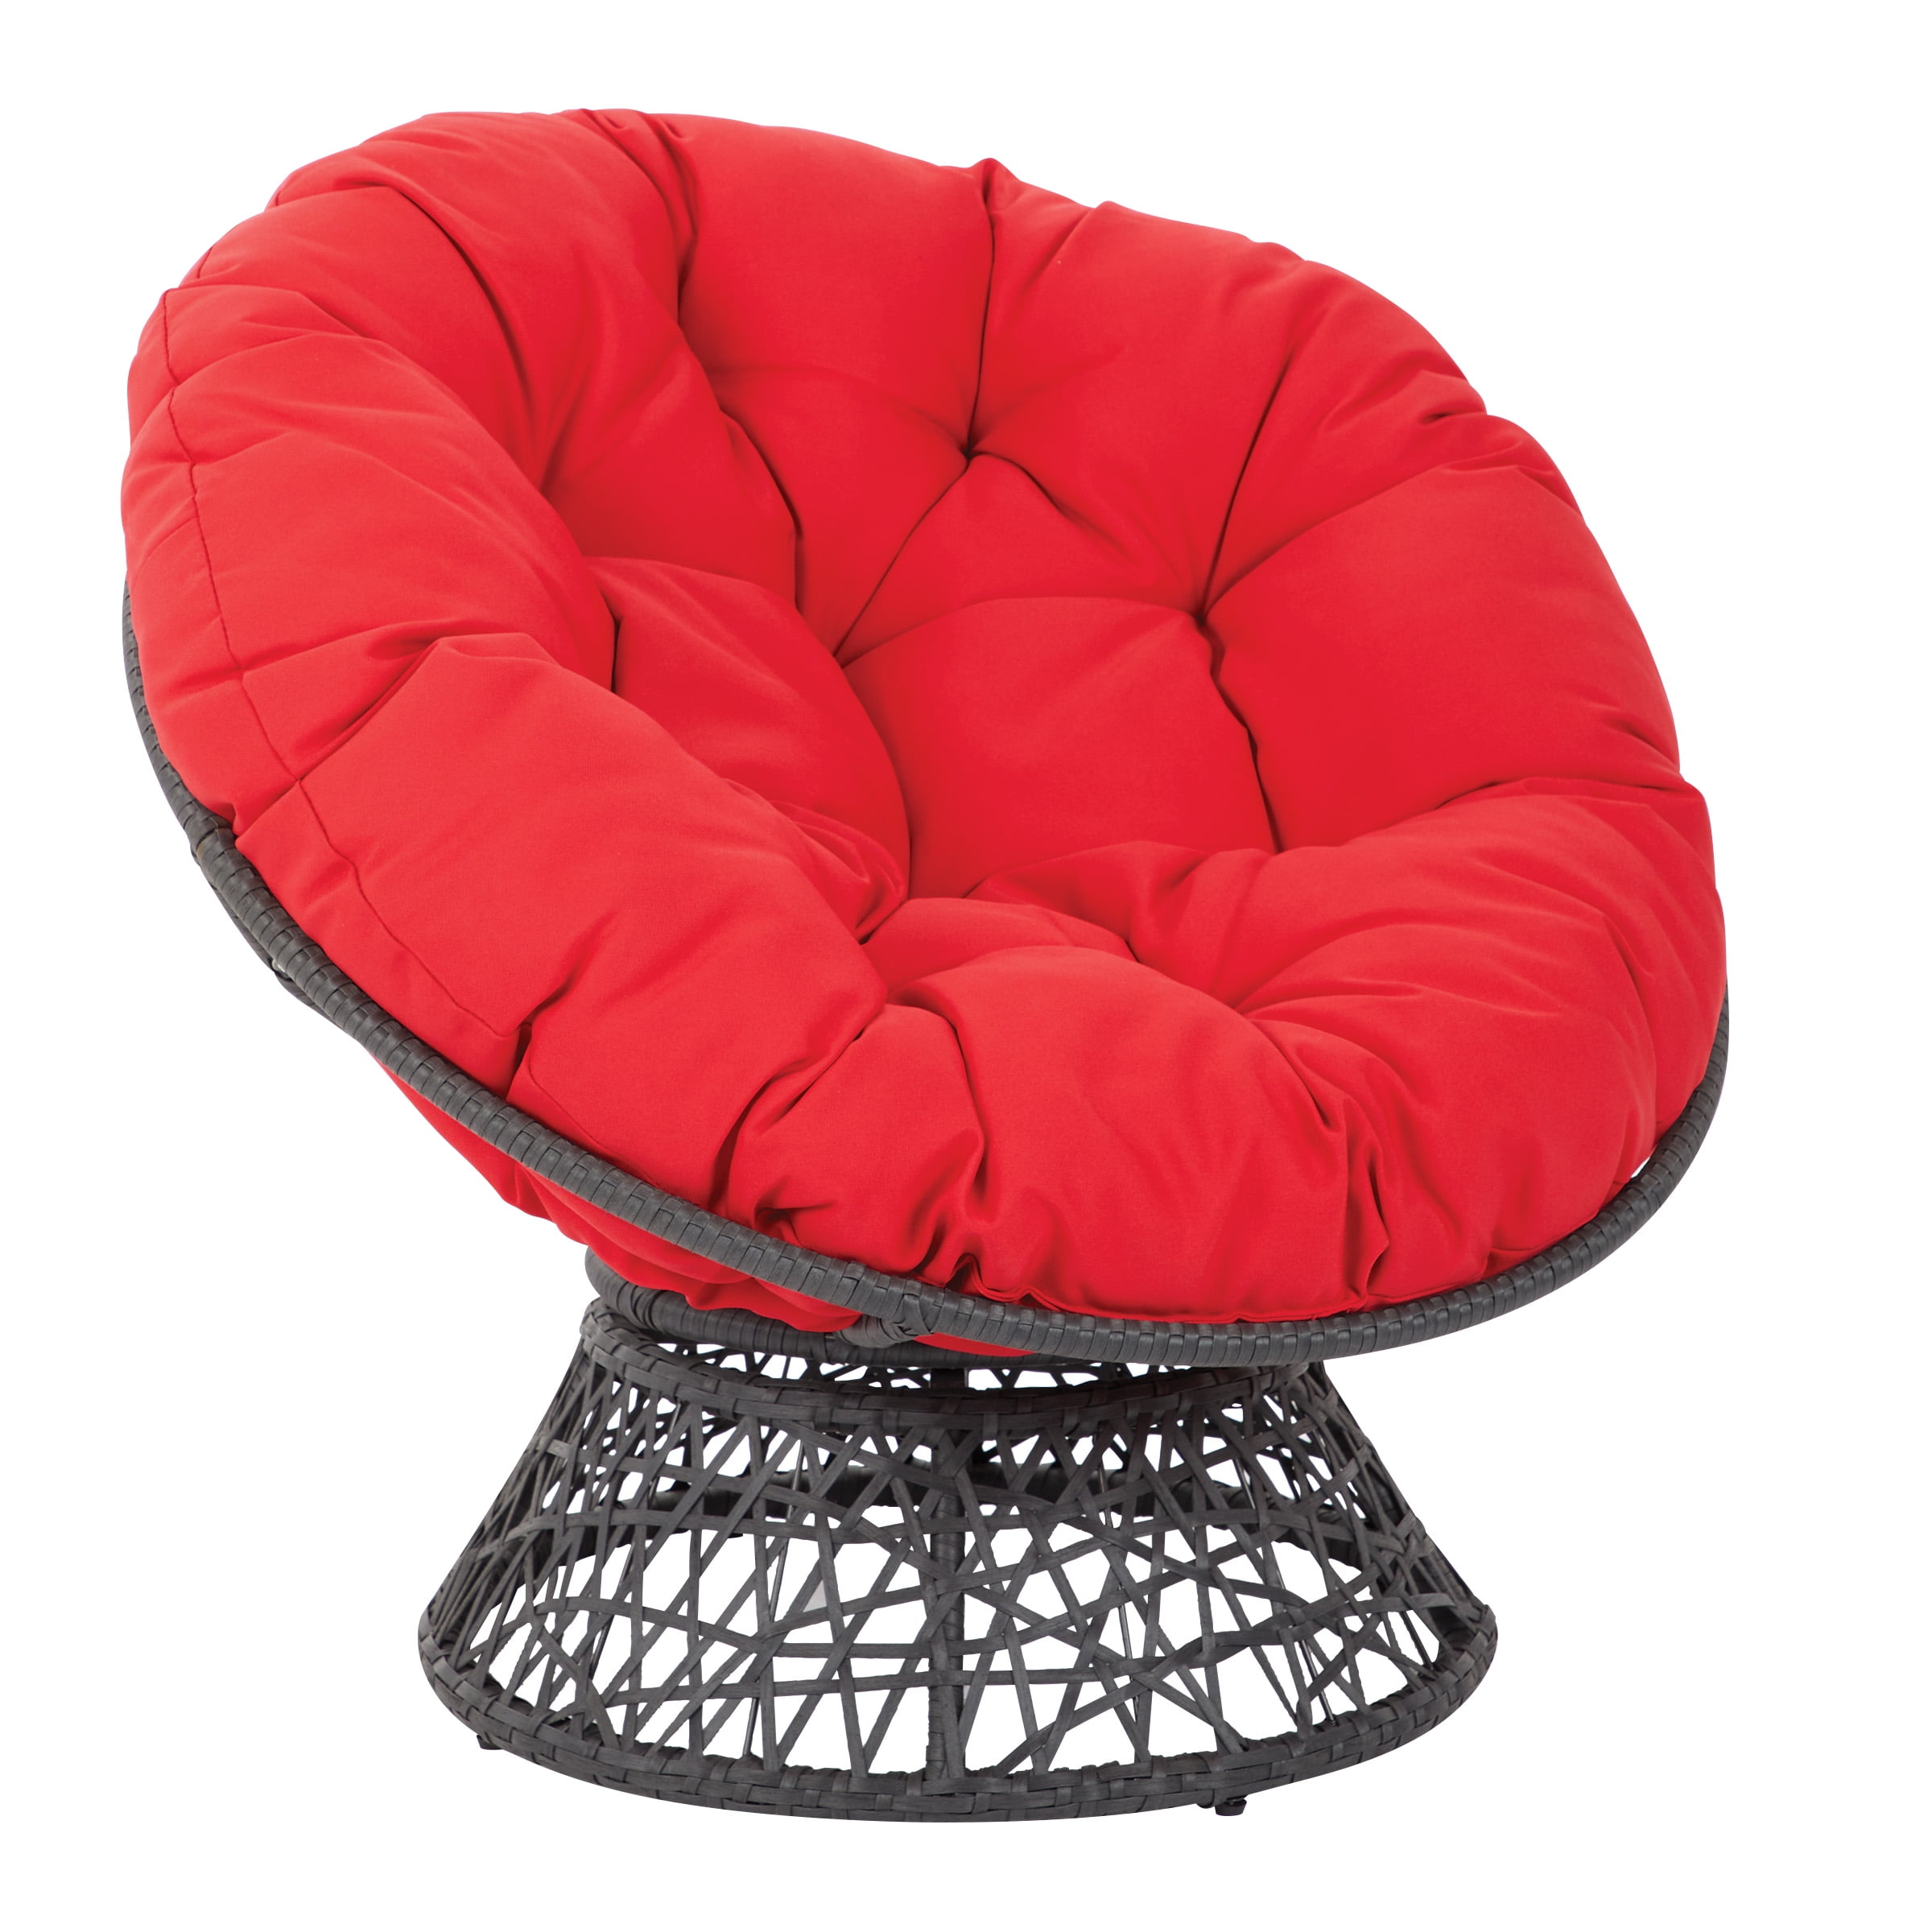 OSP Home Furnishings Papasan Chair with Red cushion and